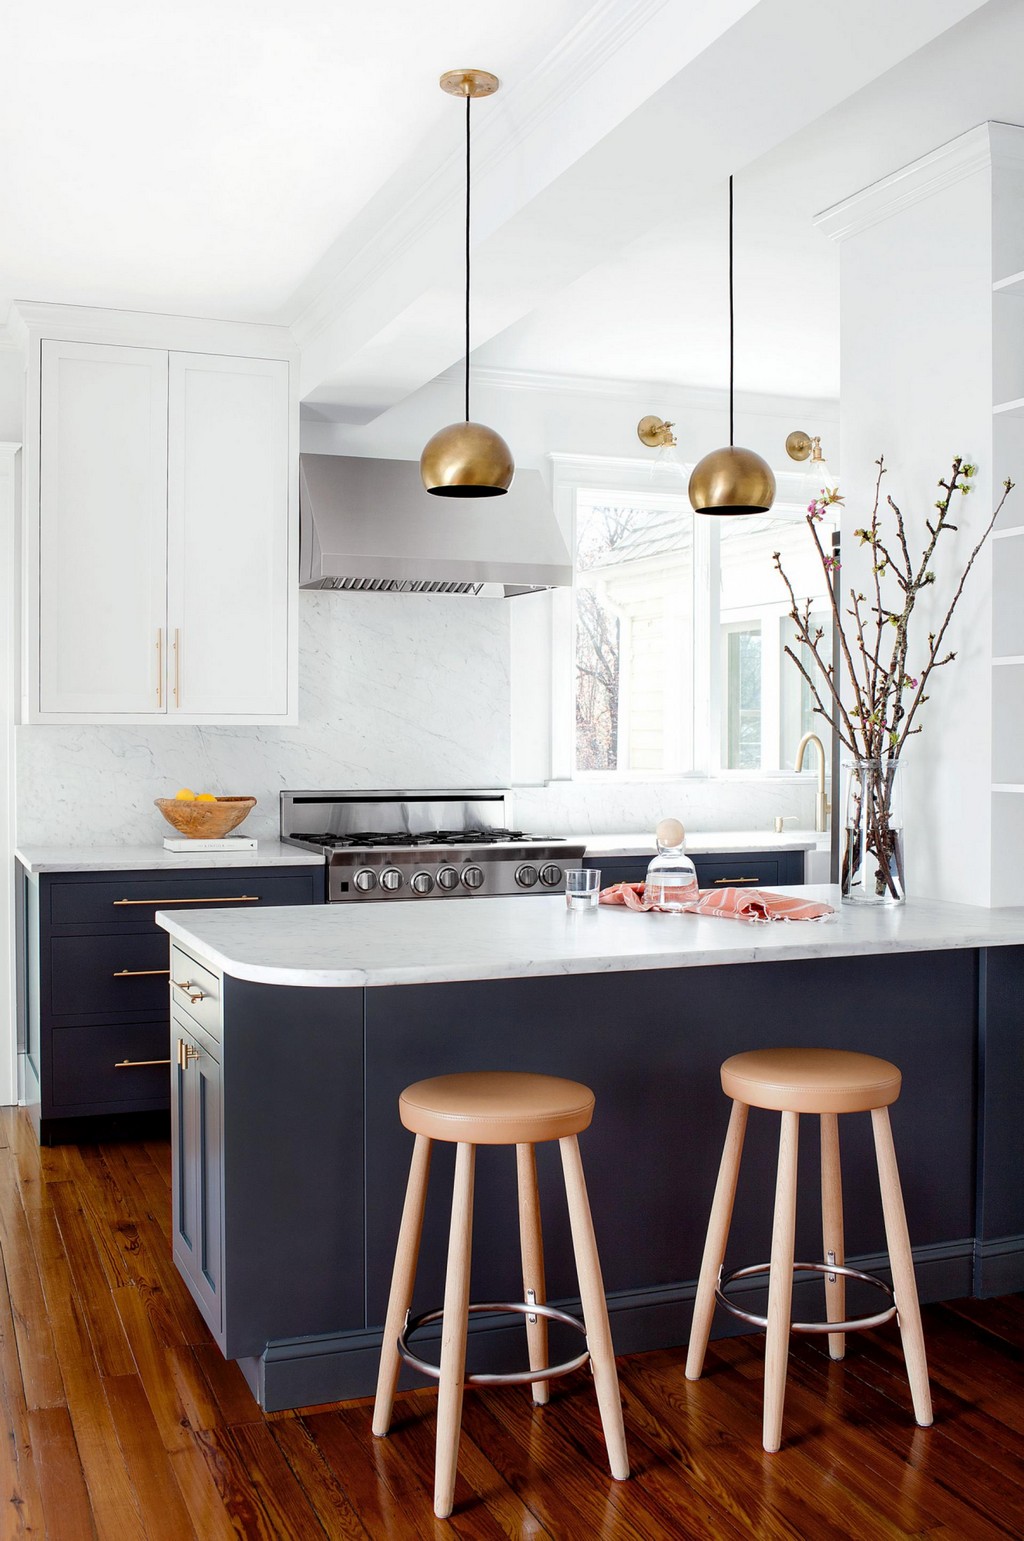 7 Kitchen Counter Stools For Small Places, Small Bar And Stools